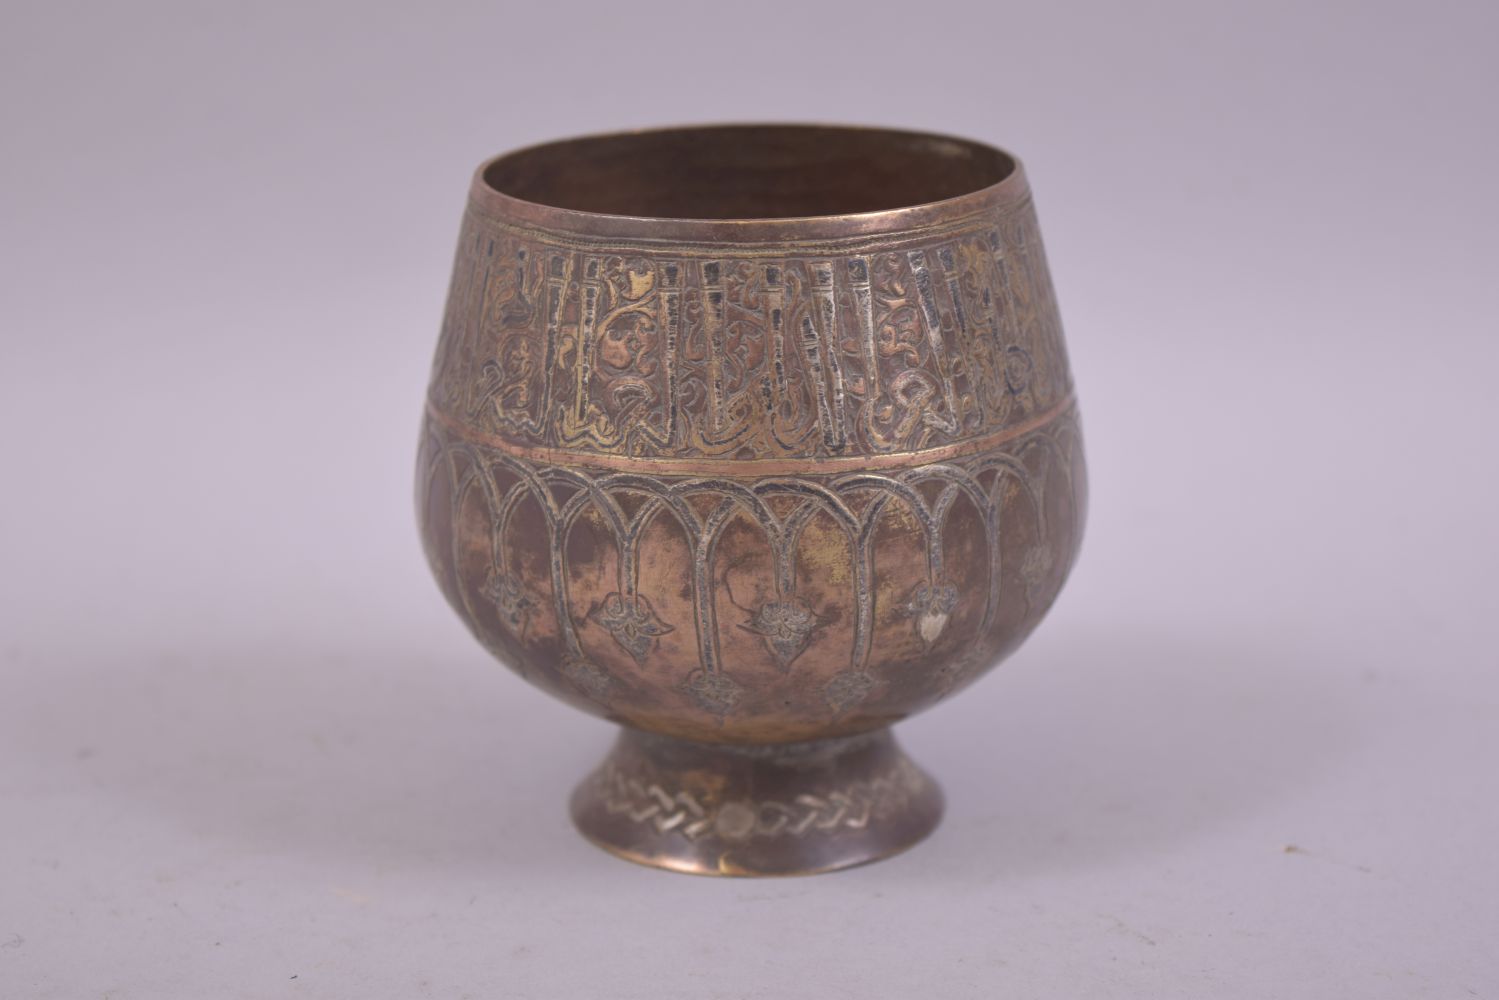 A FINE ISLAMIC SMALL BRASS SILVER AND COPPER OVERLAID GOBLET, 8.5cm high. - Image 4 of 6